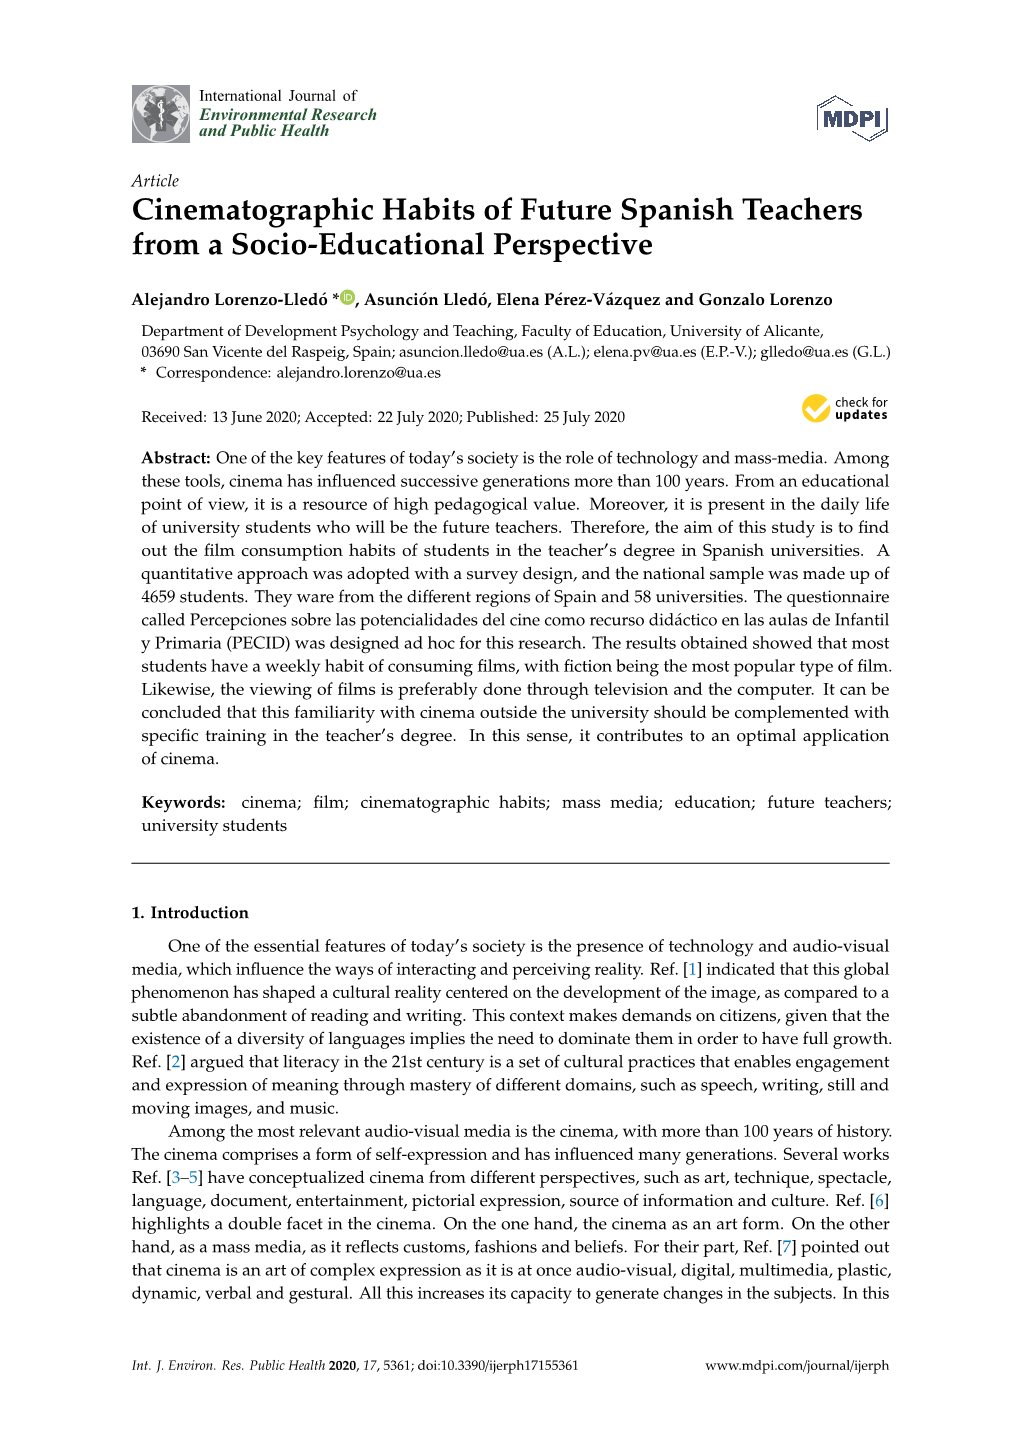 Cinematographic Habits of Future Spanish Teachers from a Socio-Educational Perspective